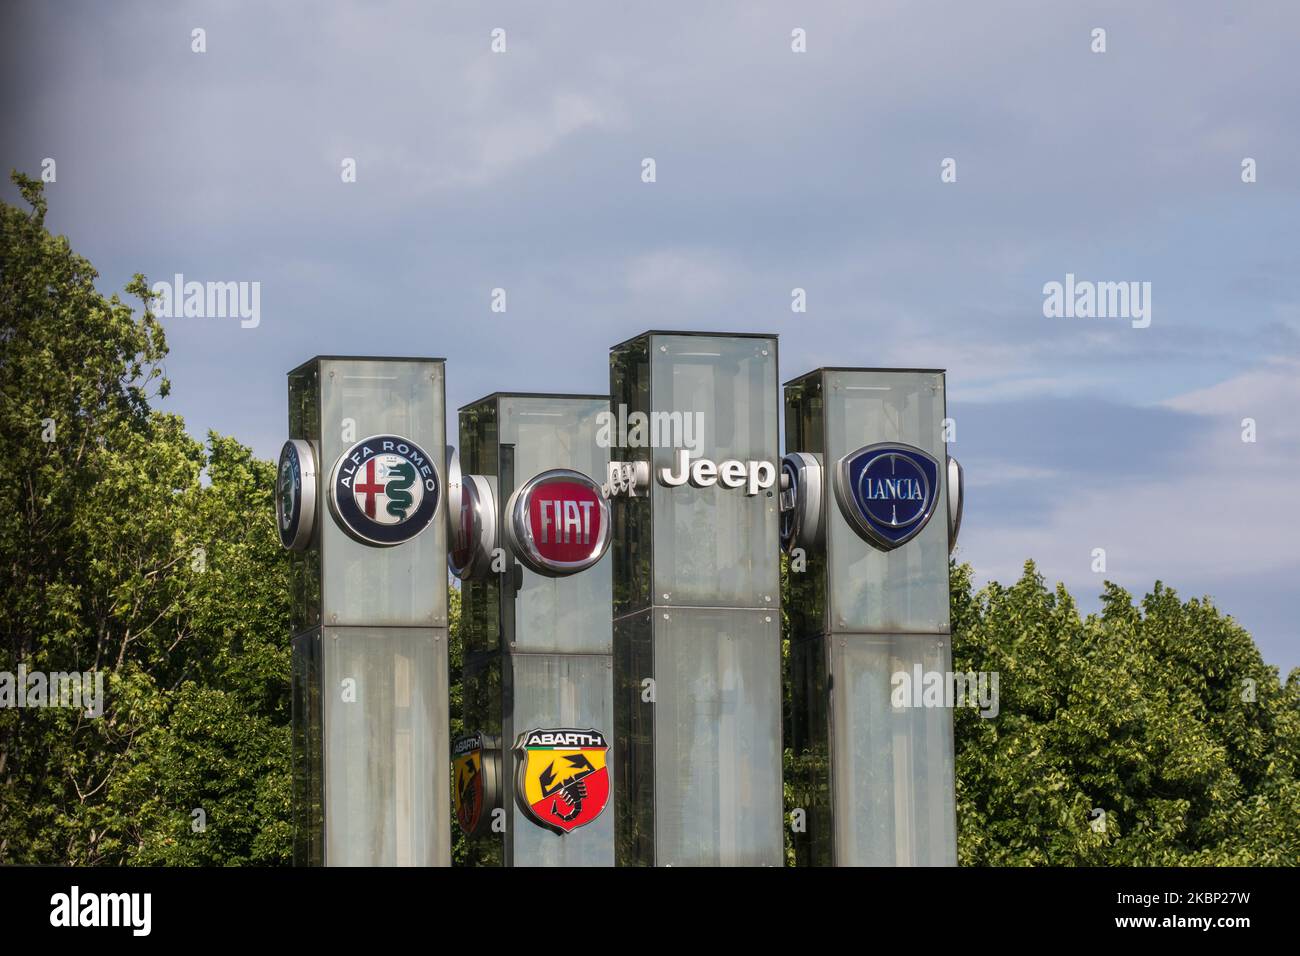 The logos of automobile companies (L-R) (L-R) Alfa Romeo, Fiat, Jeep, Lancia and Abarth (bottom) are pictured at the entrance to the Fiat Chrysler Automobiles (FCA) at the Fiat Mirafiori car plant on in Turin, Italy on 19th May 2020. FCA's Italian loan request as part of more than 400 billion euros Italy is making available to businesses hit by the pandemic, raises criticism within the ruling Italian coalition. The reason is a possible payment of a large dividend to FCA's investors at a time when the coronavirus crisis has left cash-starved manufacturers. (Photo by Mauro Ujetto/NurPhoto) Stock Photo